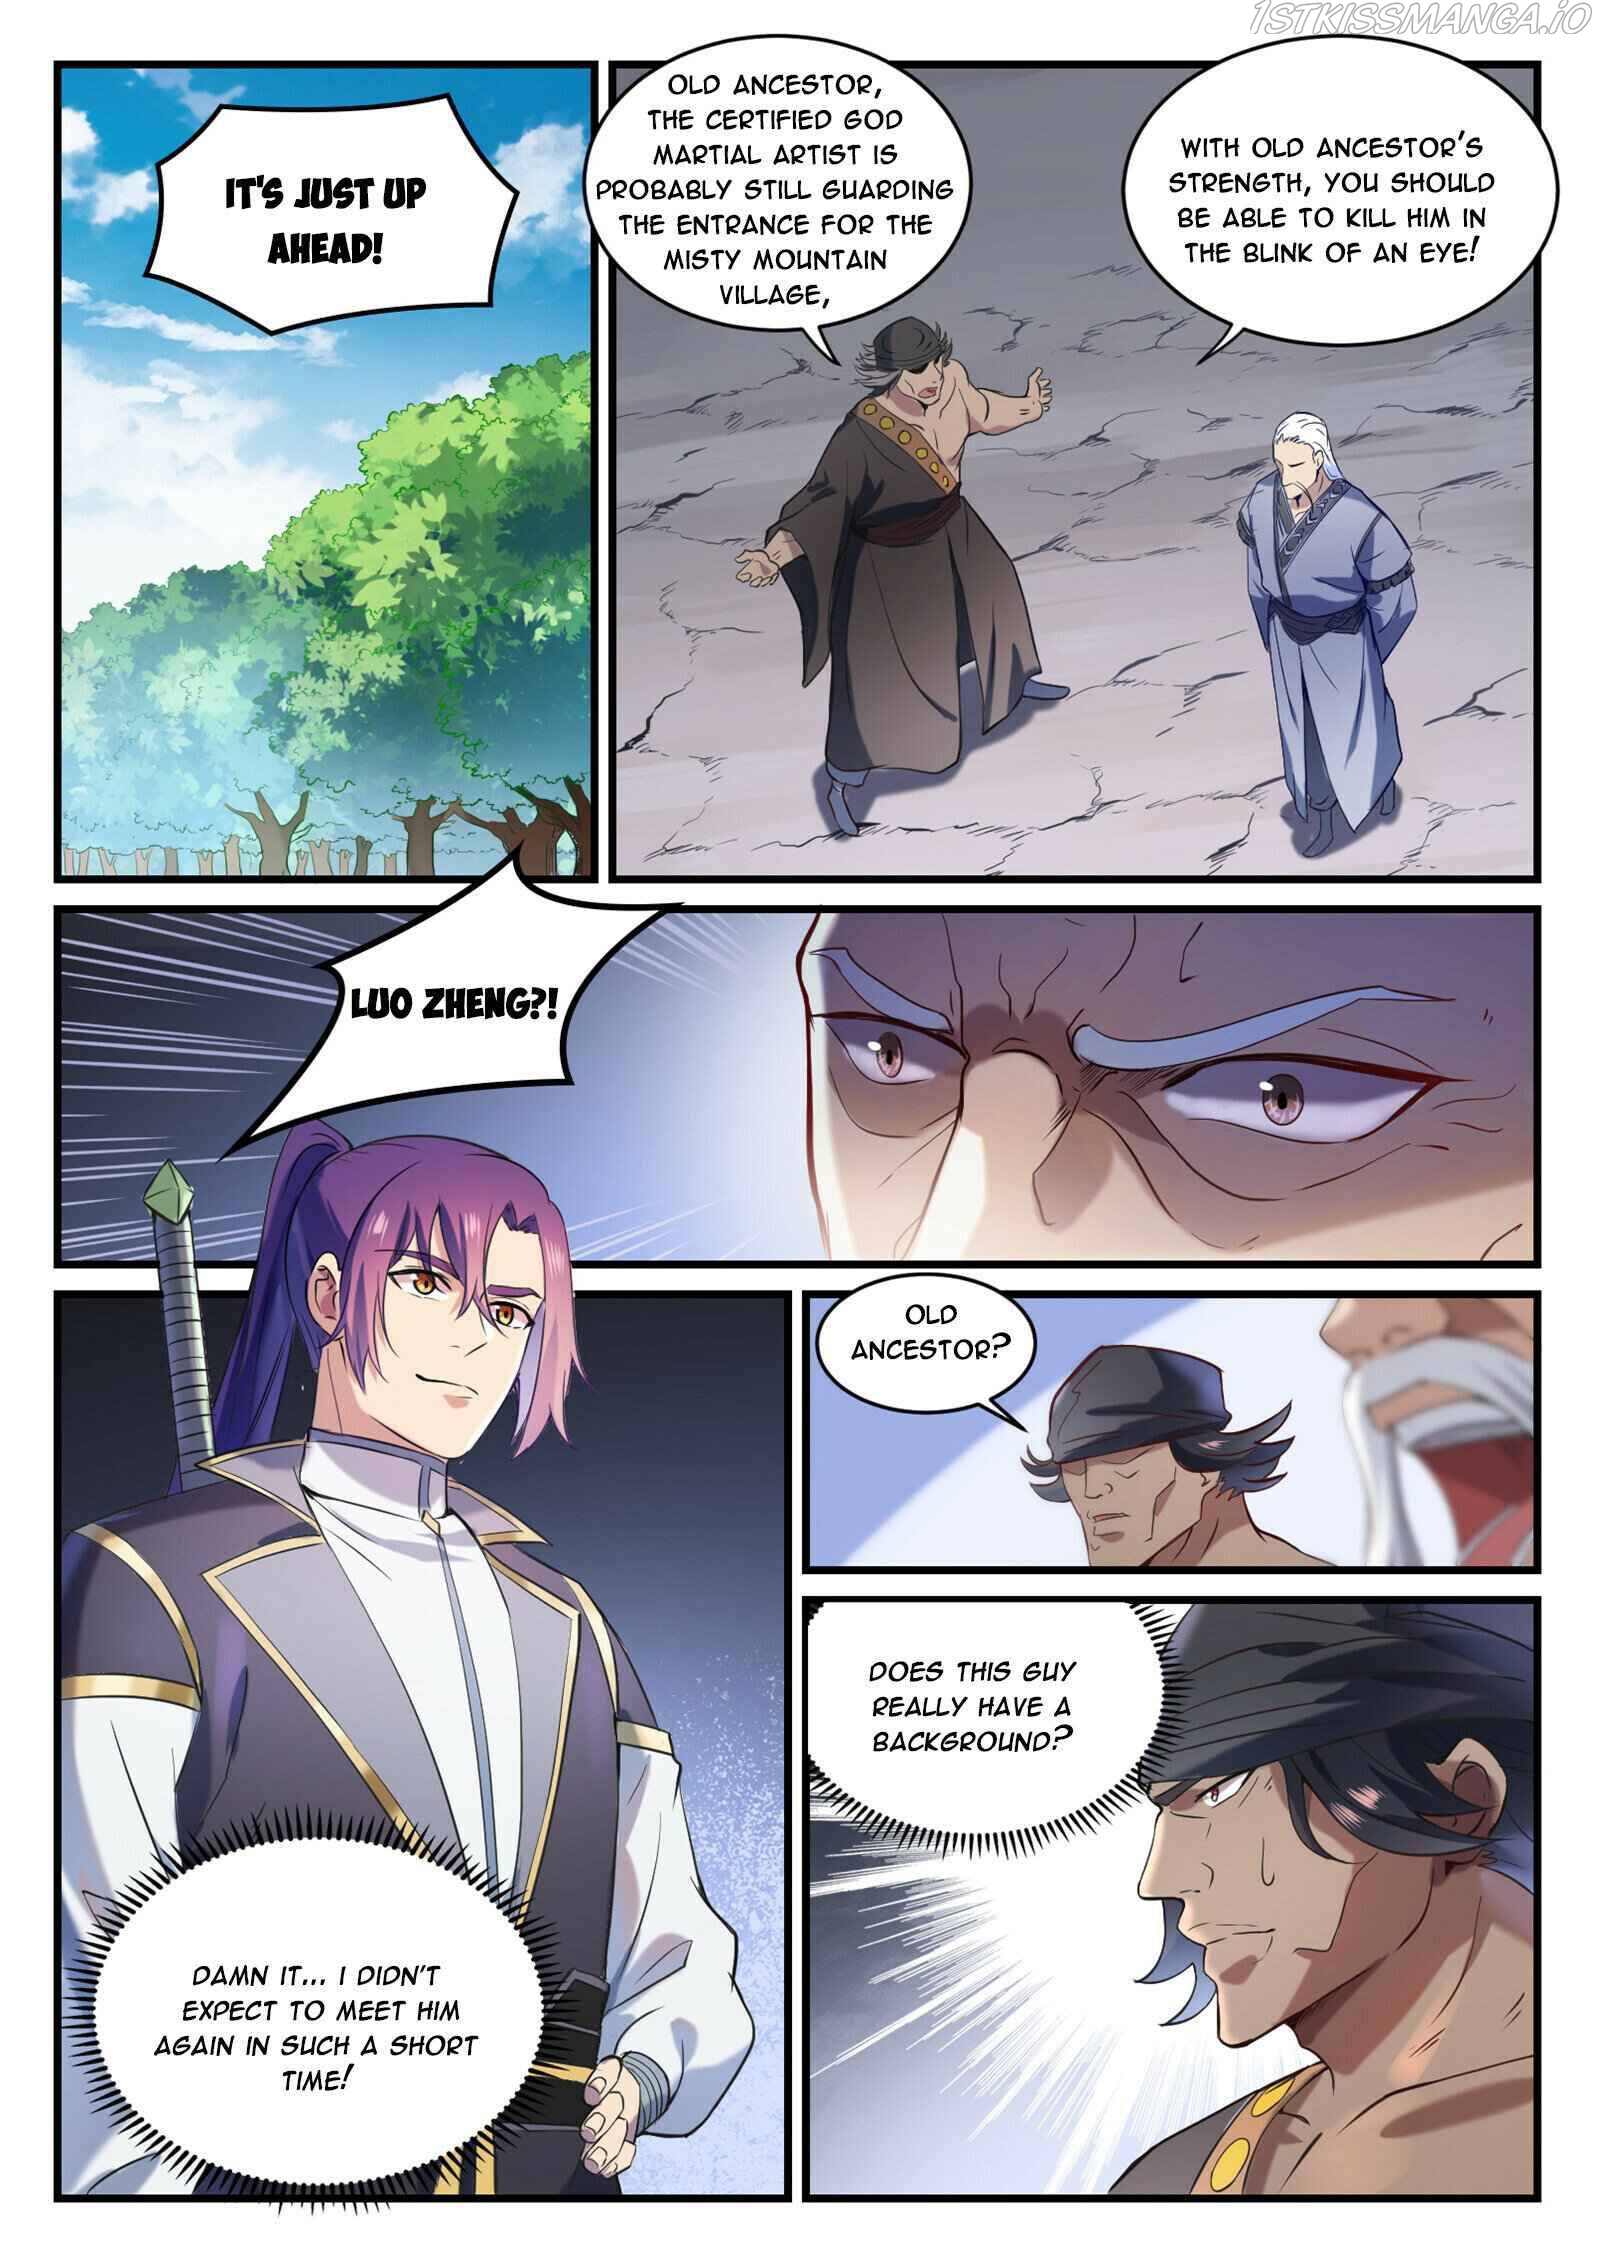 Apotheosis Chapter 846 - Page 6